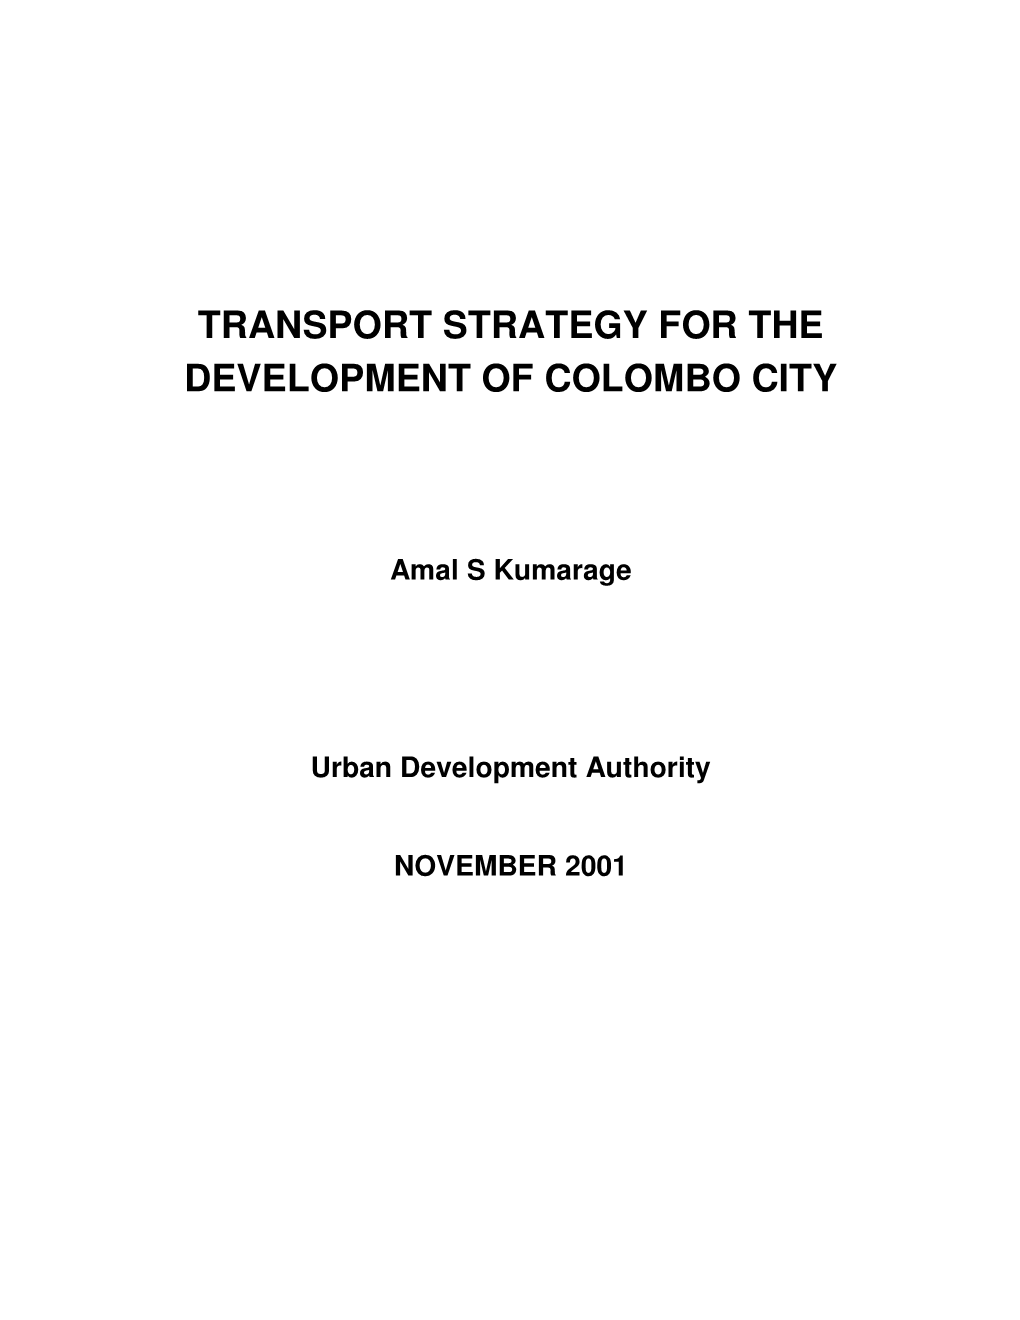 Transport Strategy for the Development of Colombo City